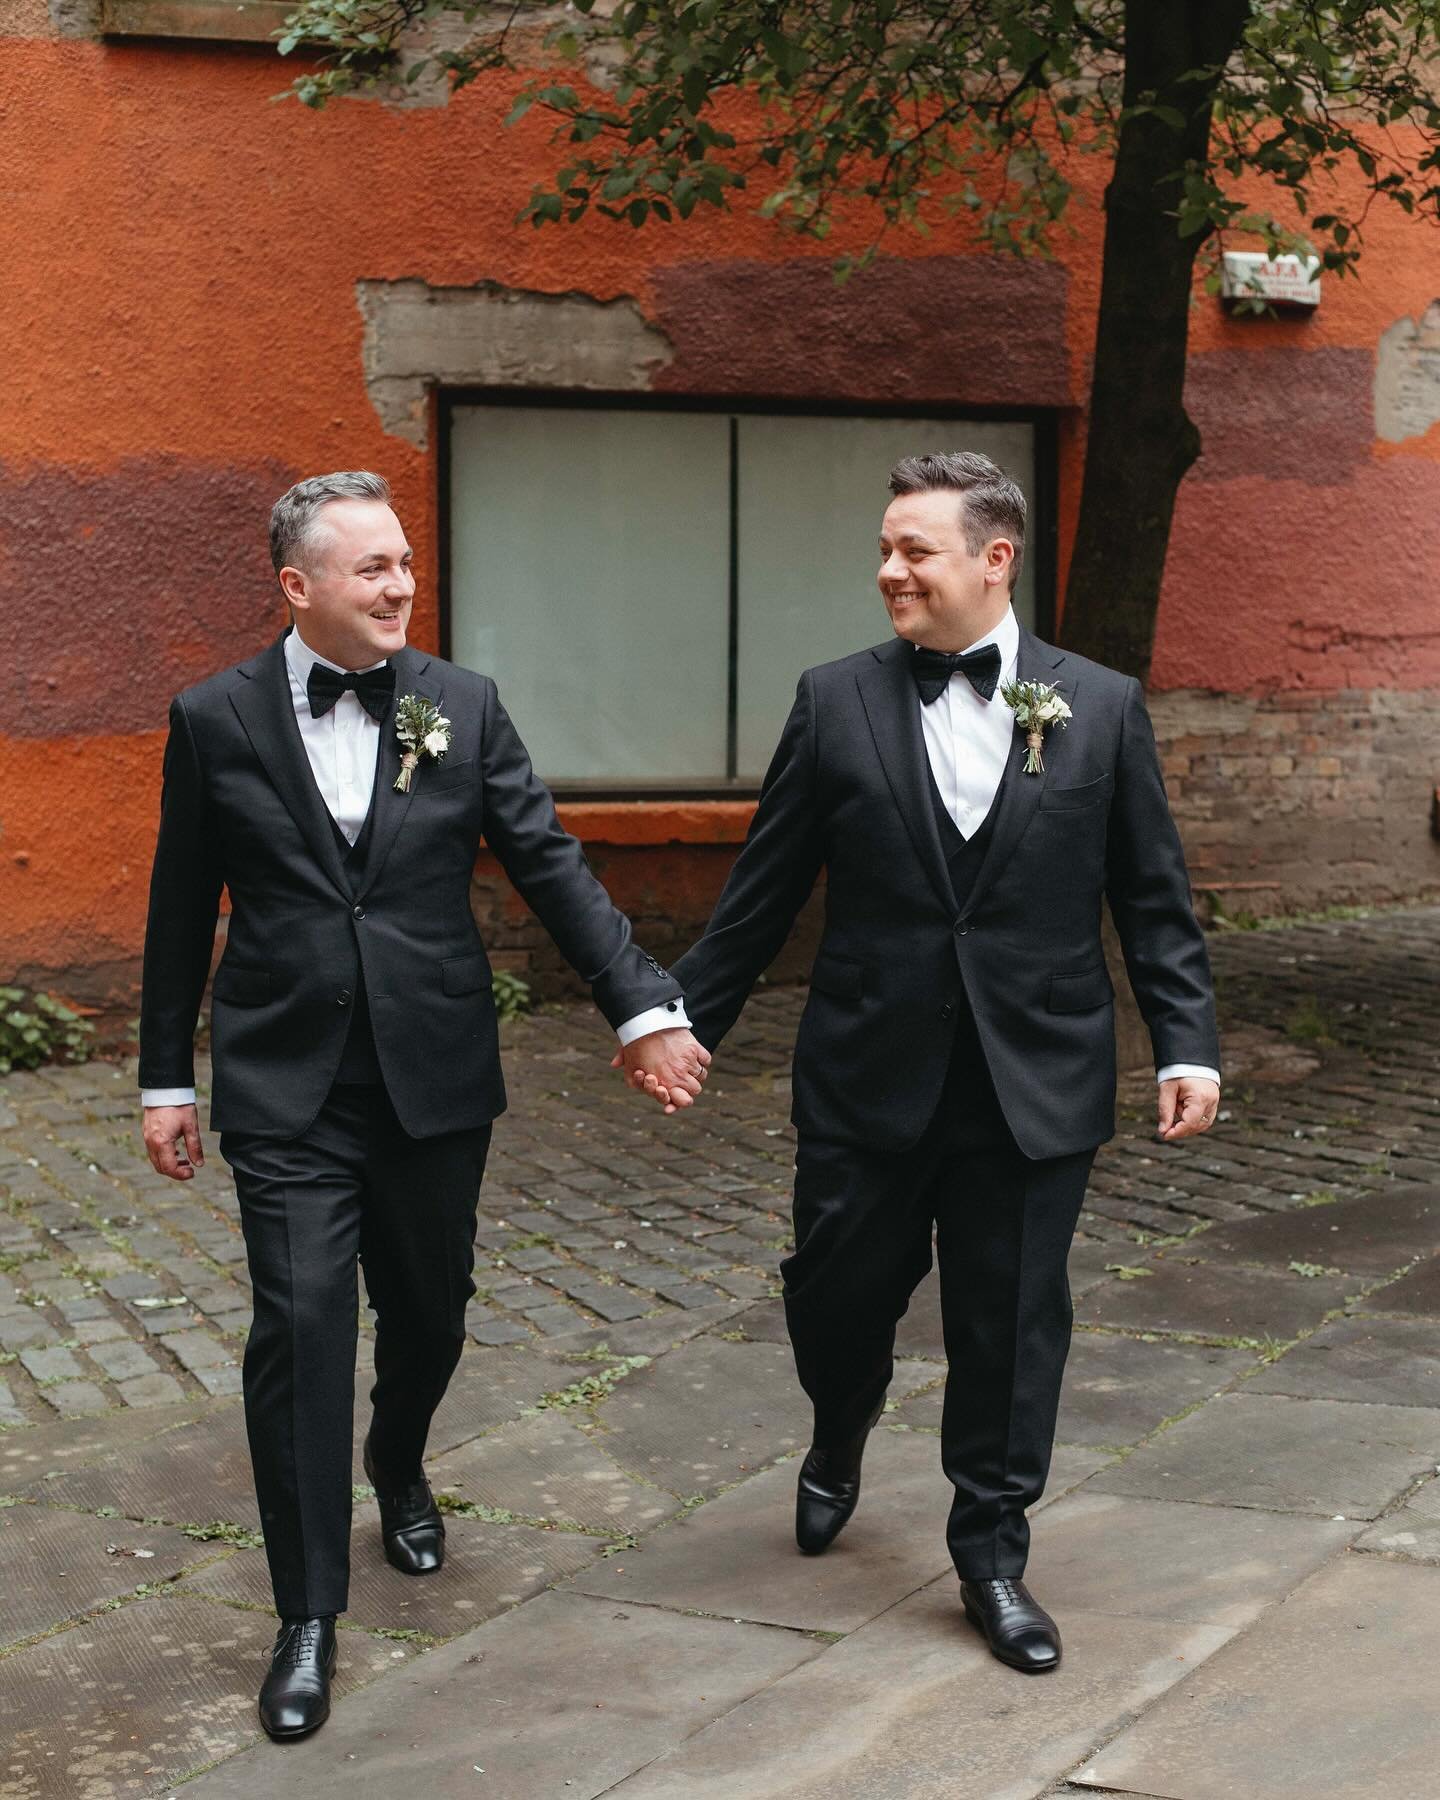 It was so lovely being back in Edinburgh to capture Ross &amp; Jack&rsquo;s wonderful wedding celebrations at the weekend. A morning getting ready and sipping champagne at the fabulous @chevaltheedinburghgrand was followed by a magical ceremony at th